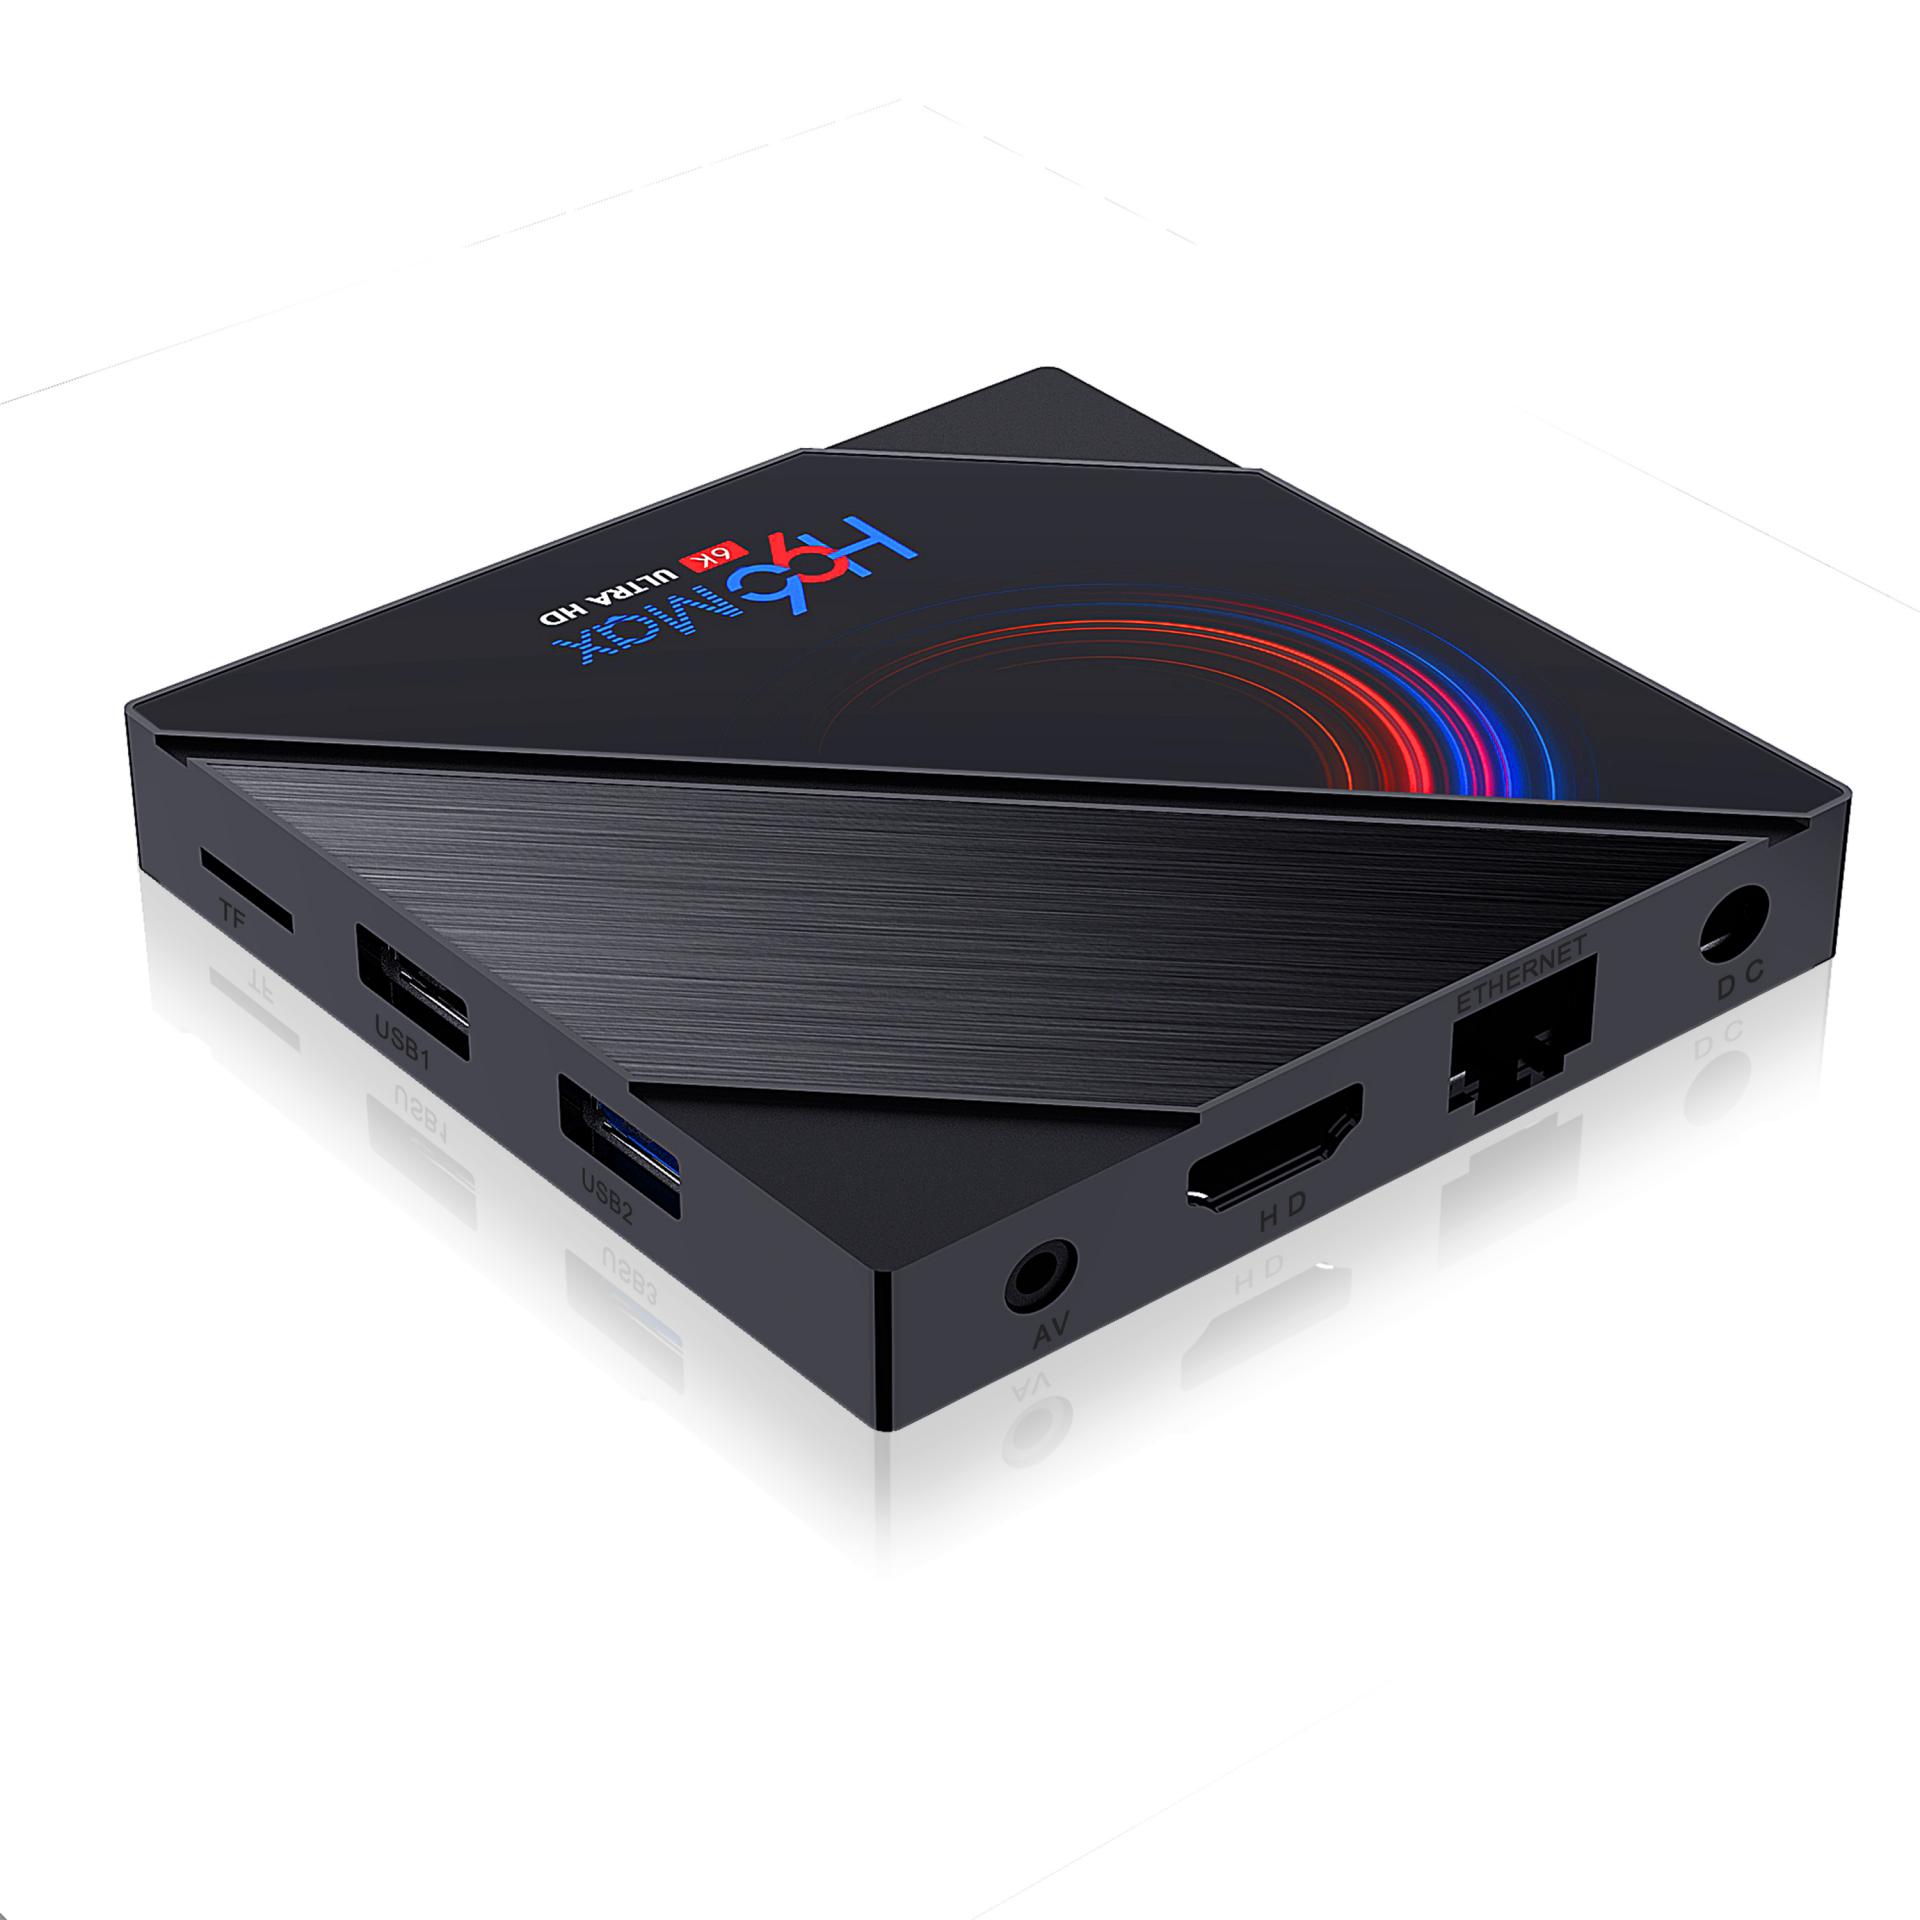 B2B Wholesale 6K Android Tv Box Low Cost -H96Max H616 Smart TV BOX